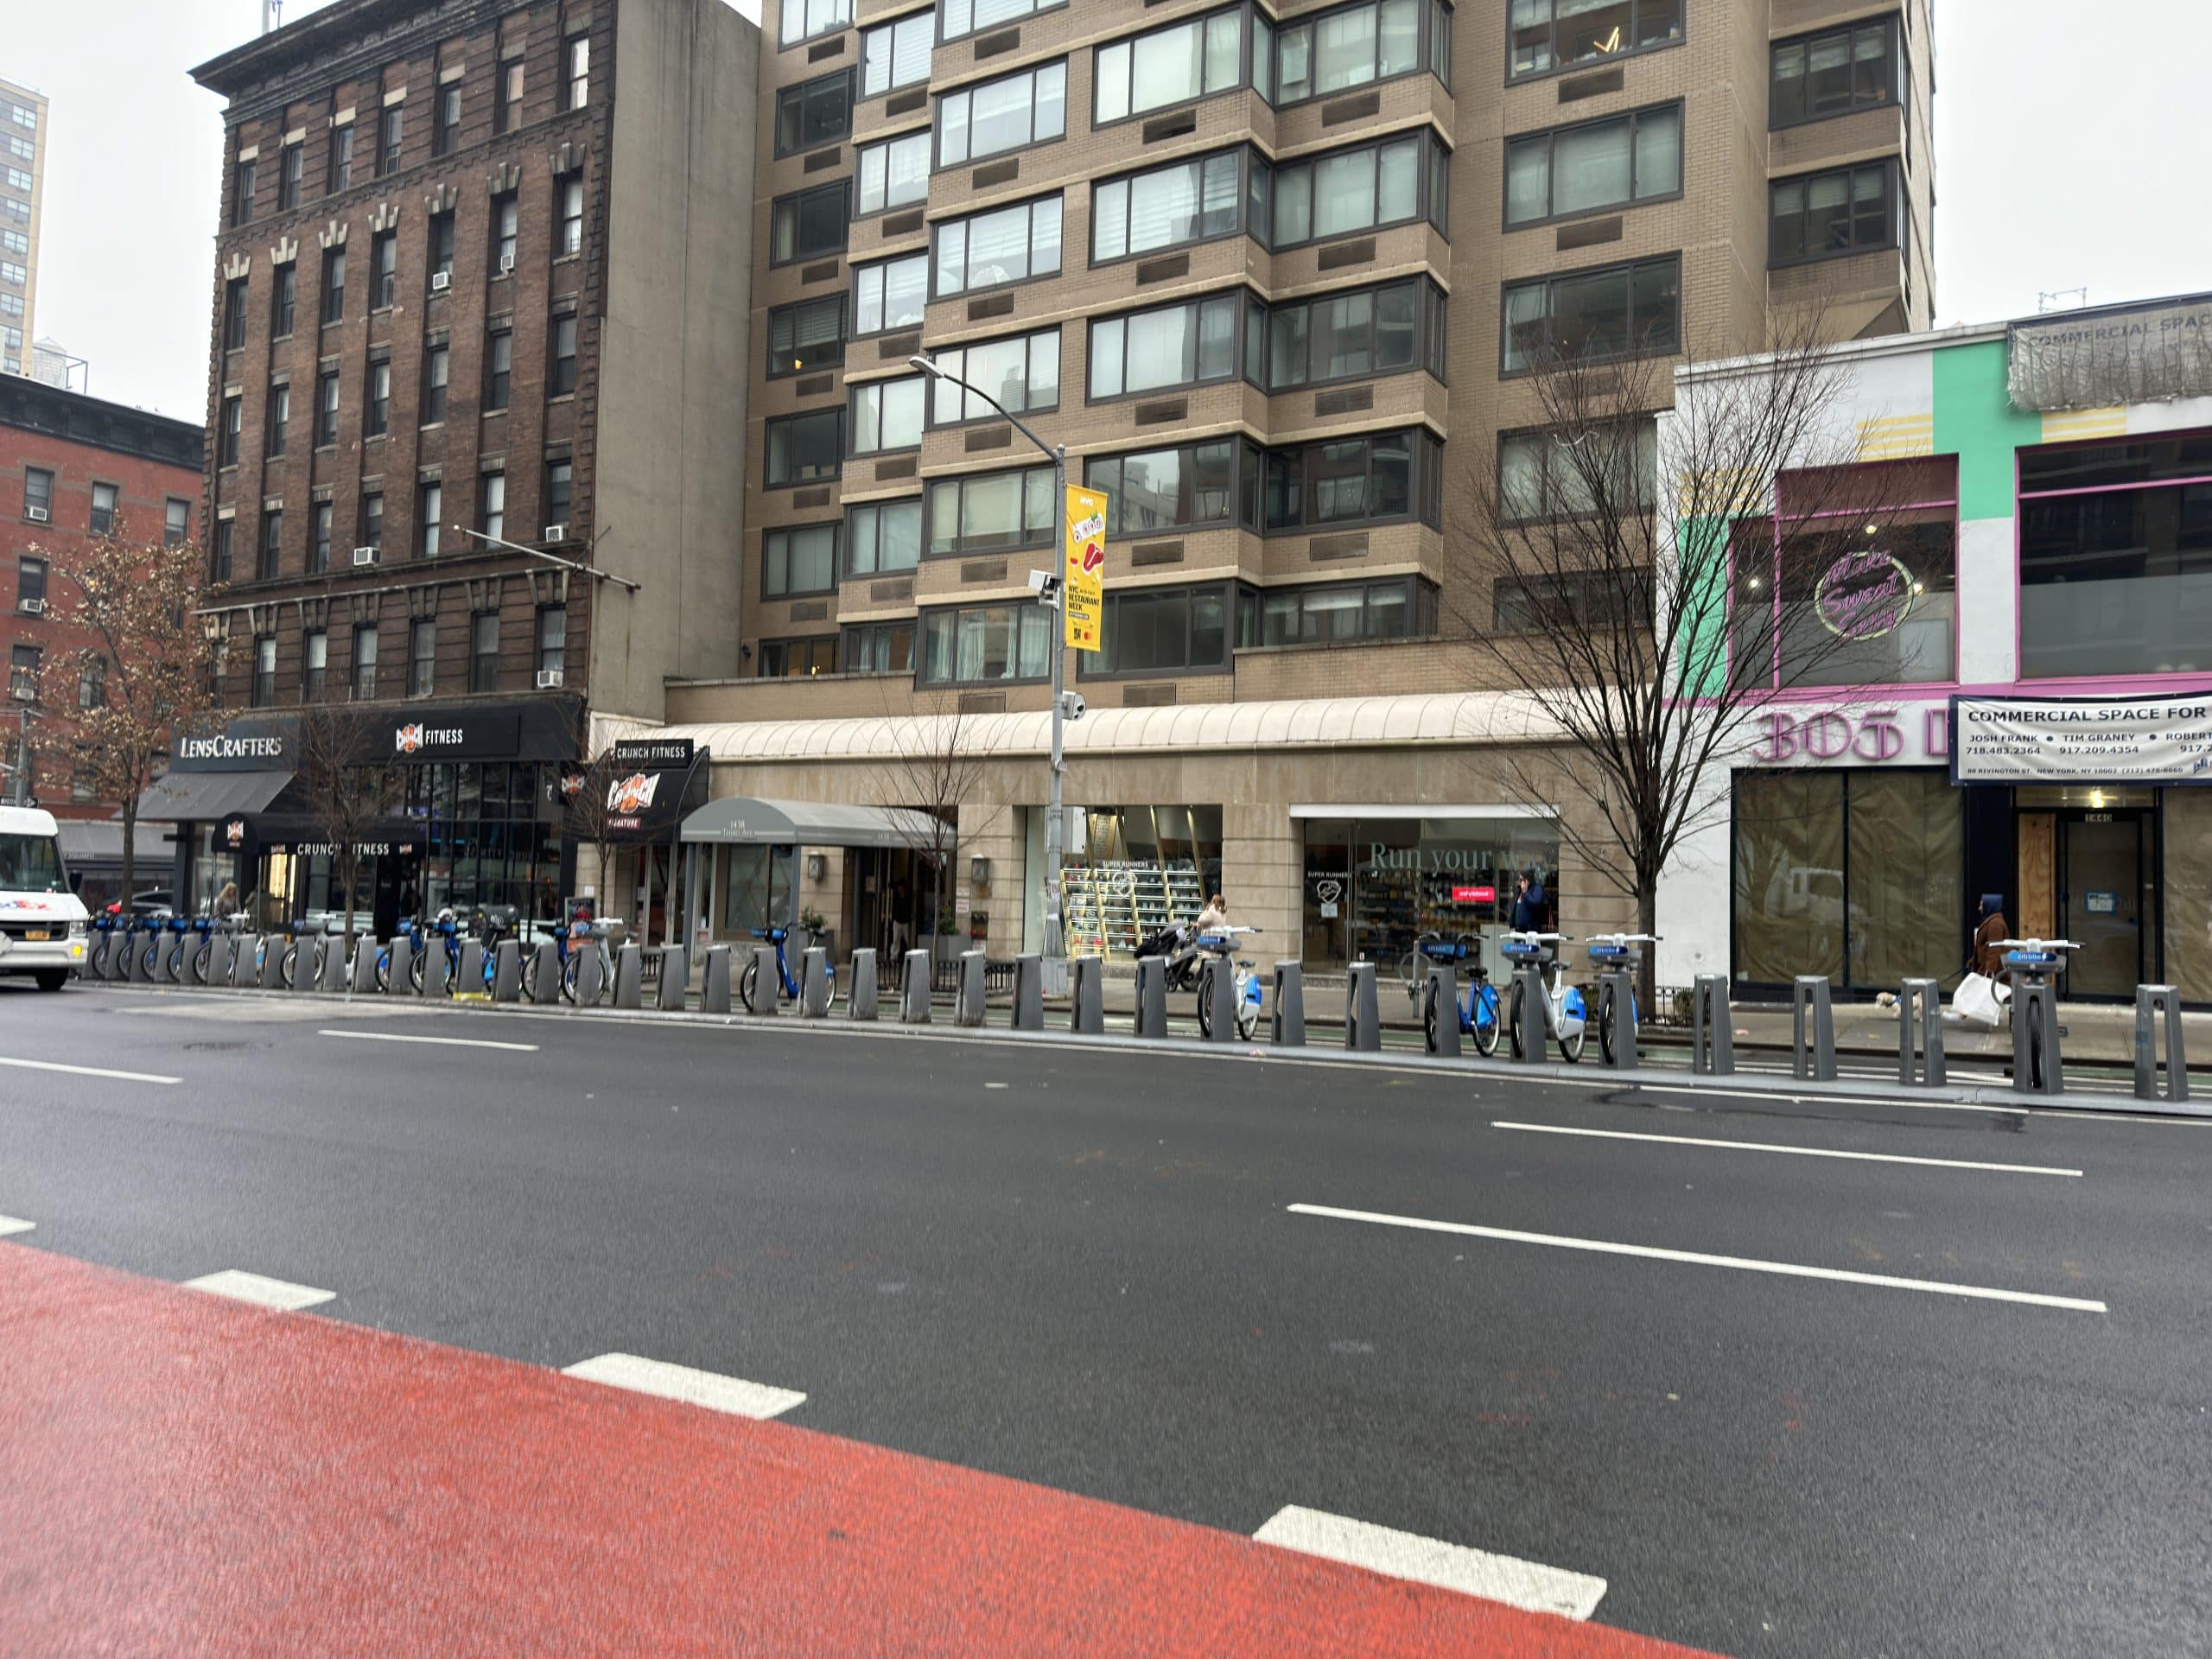 Photo shows a wide shot a row of more than three dozen bike docks lined up creating an obstacle in front of a beige apartment building whose awning extends to the curb.